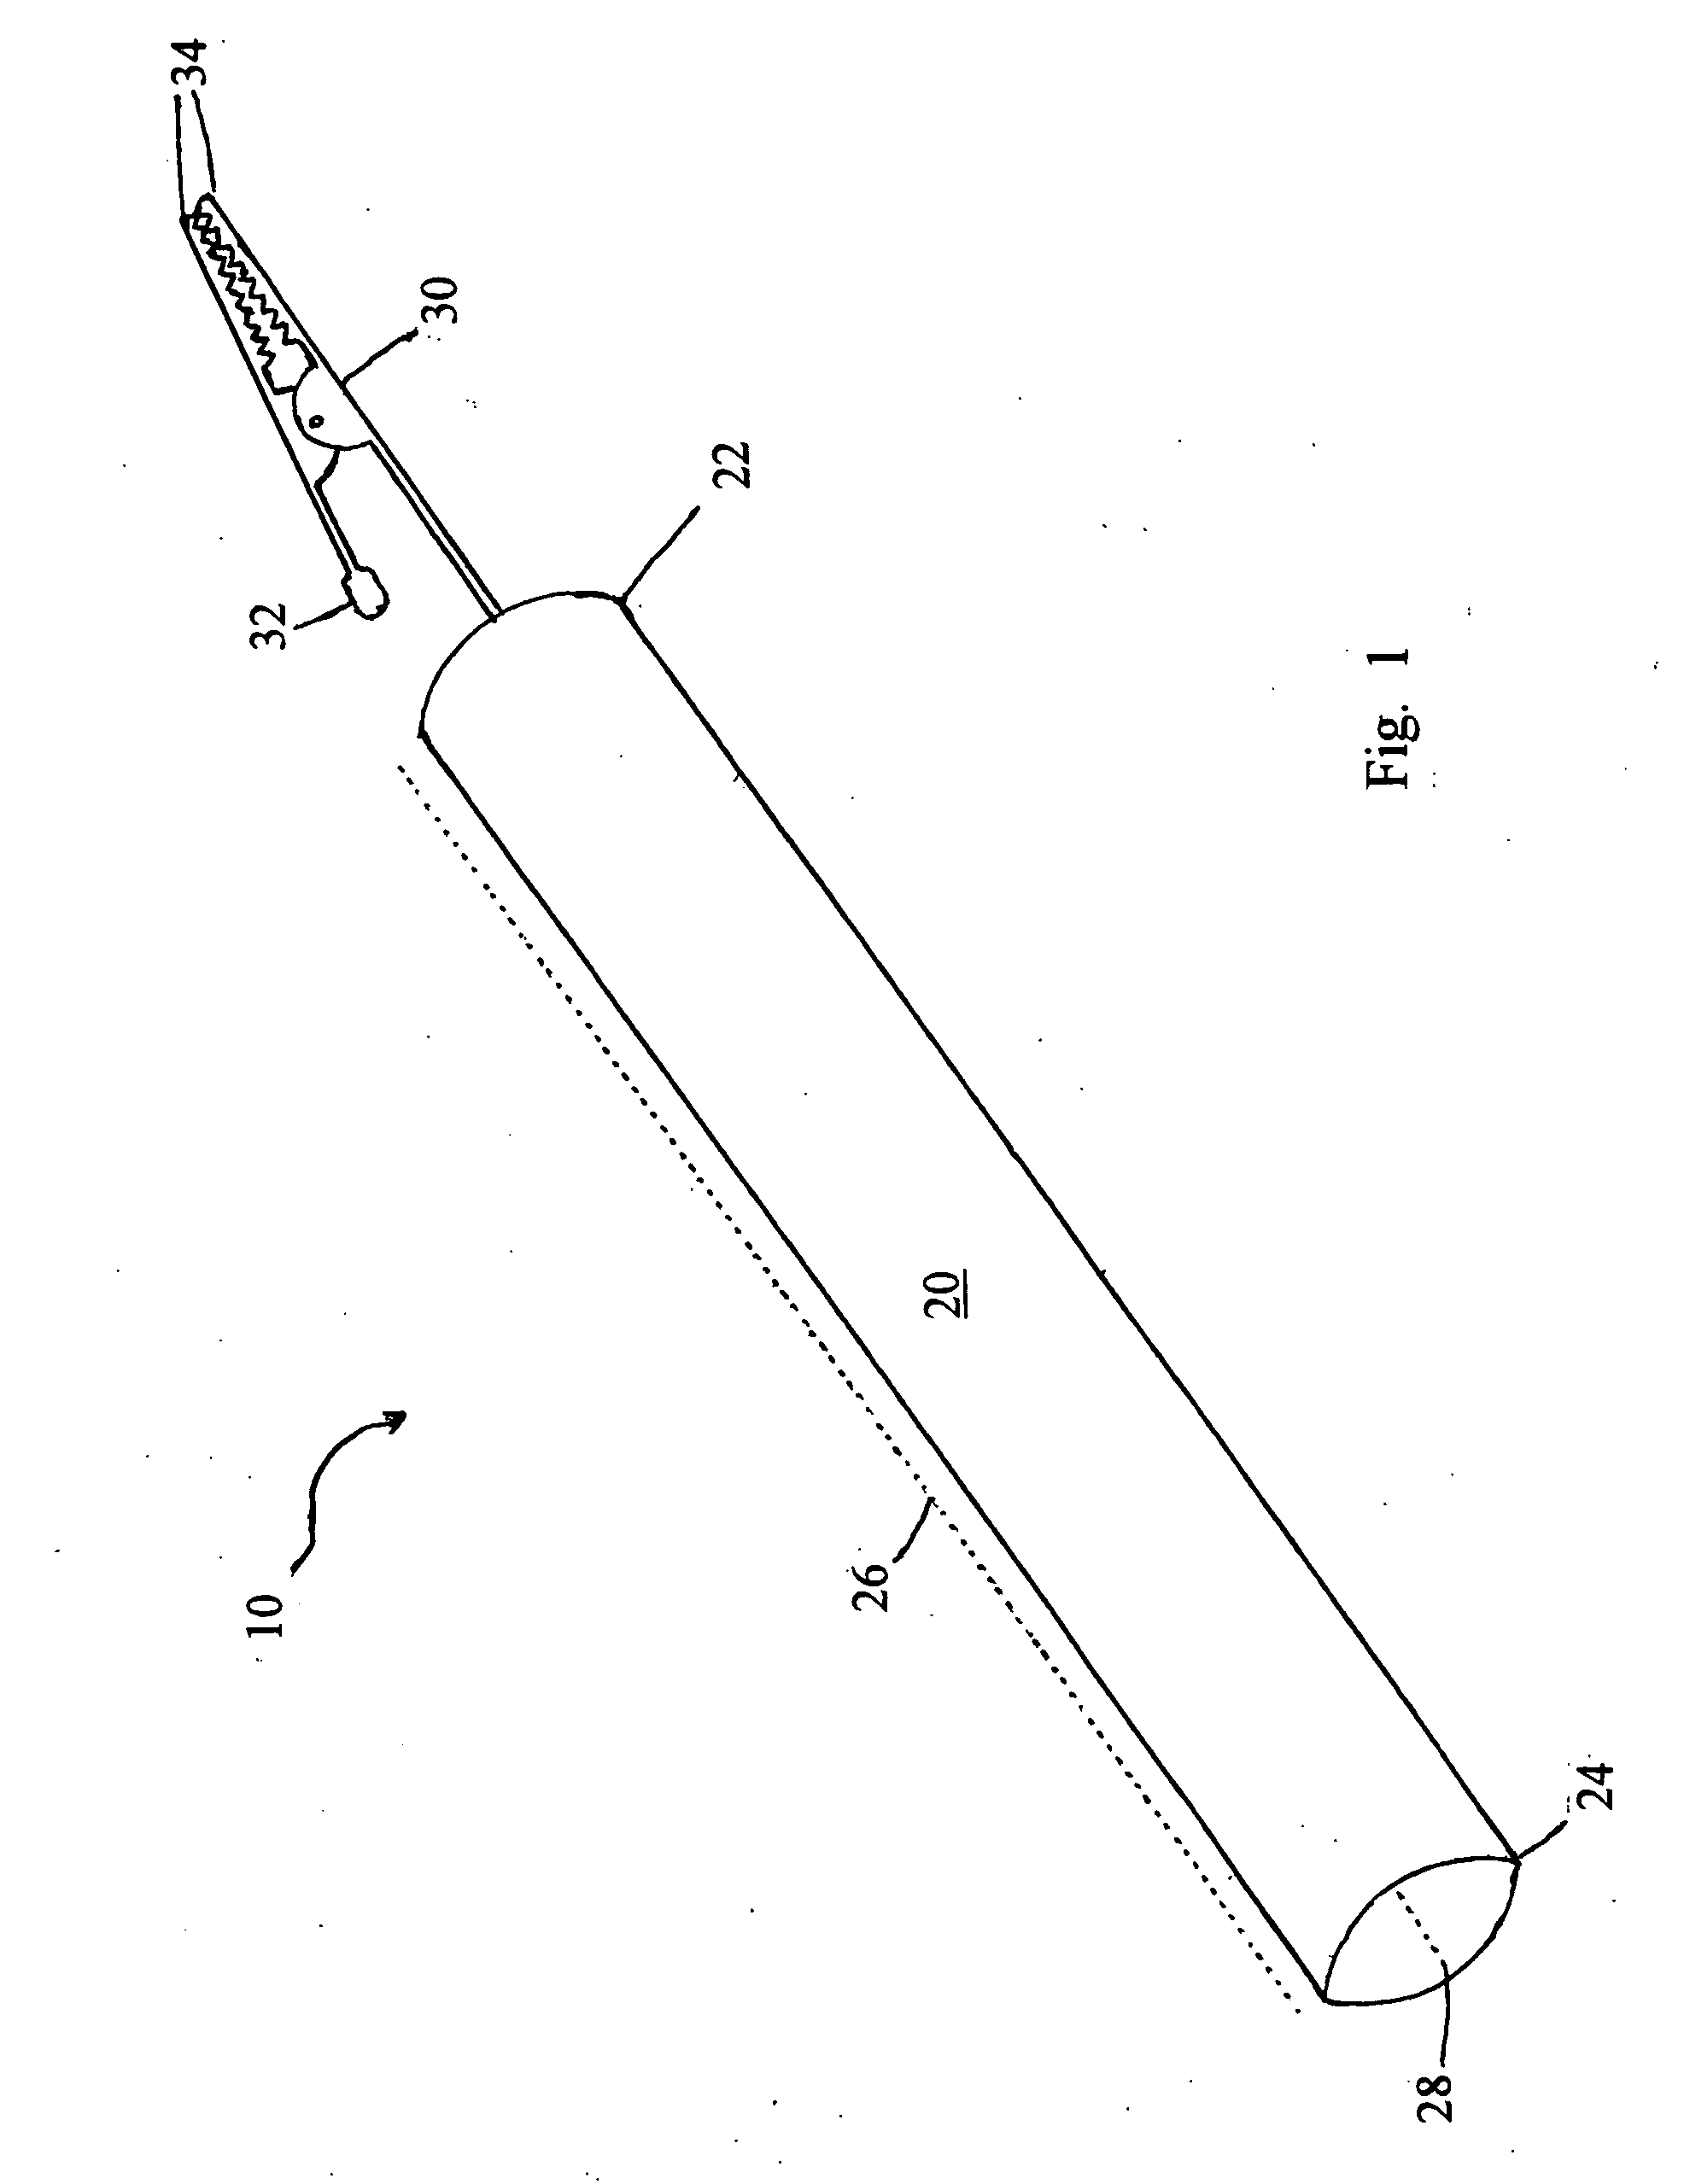 Apparatus for tying fishing line to fishing tackle and methods for use